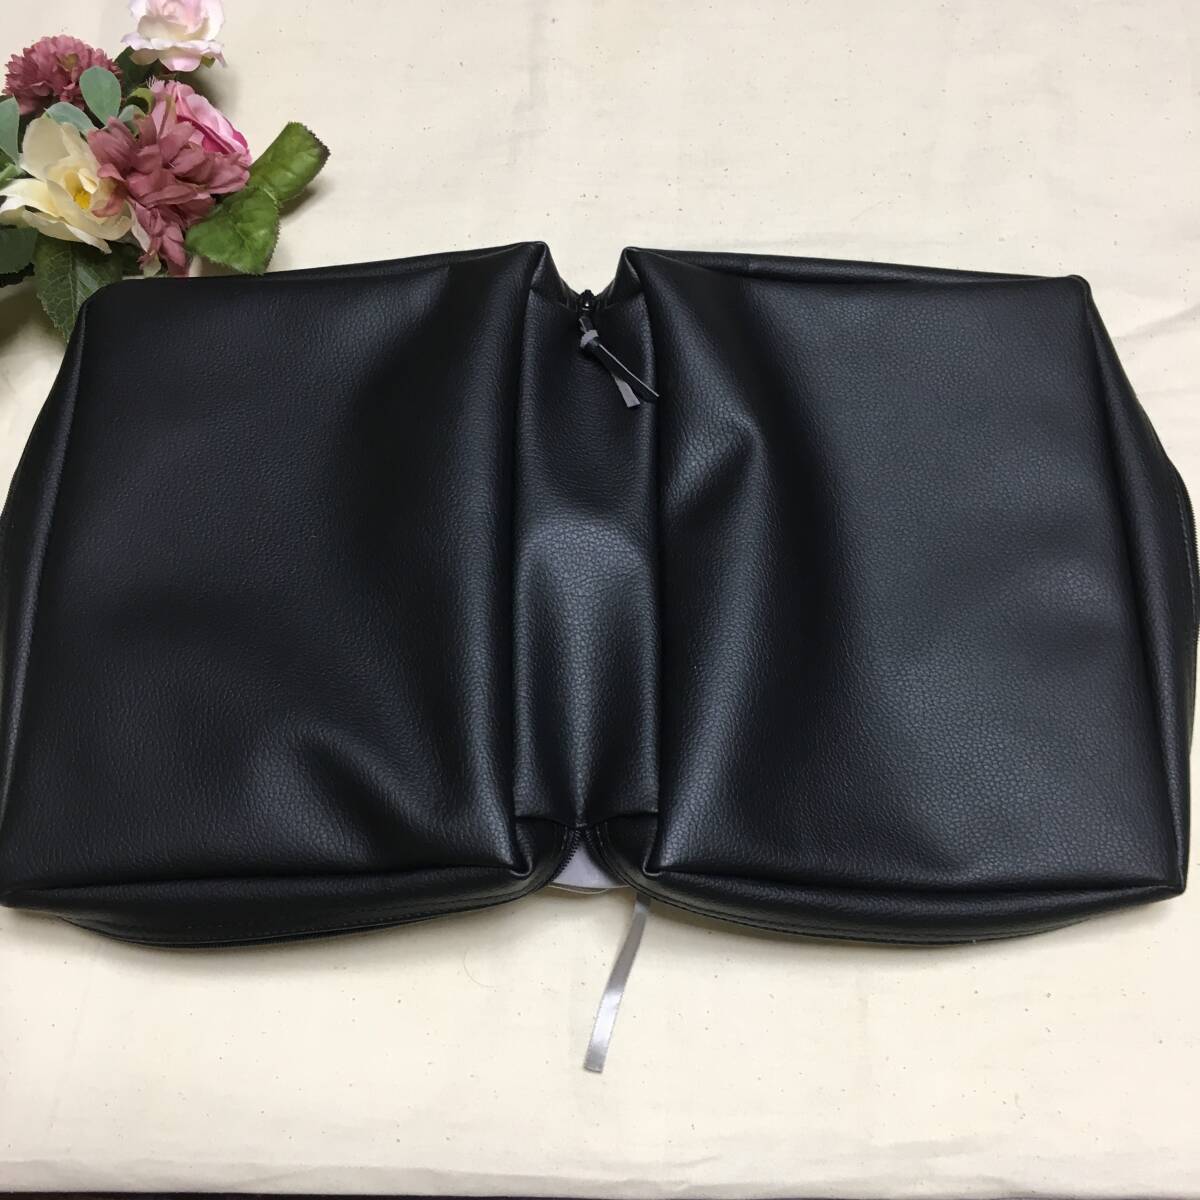 139*2019 year modified . version * large size * new world translation . paper cover * imitation leather black * hand made 